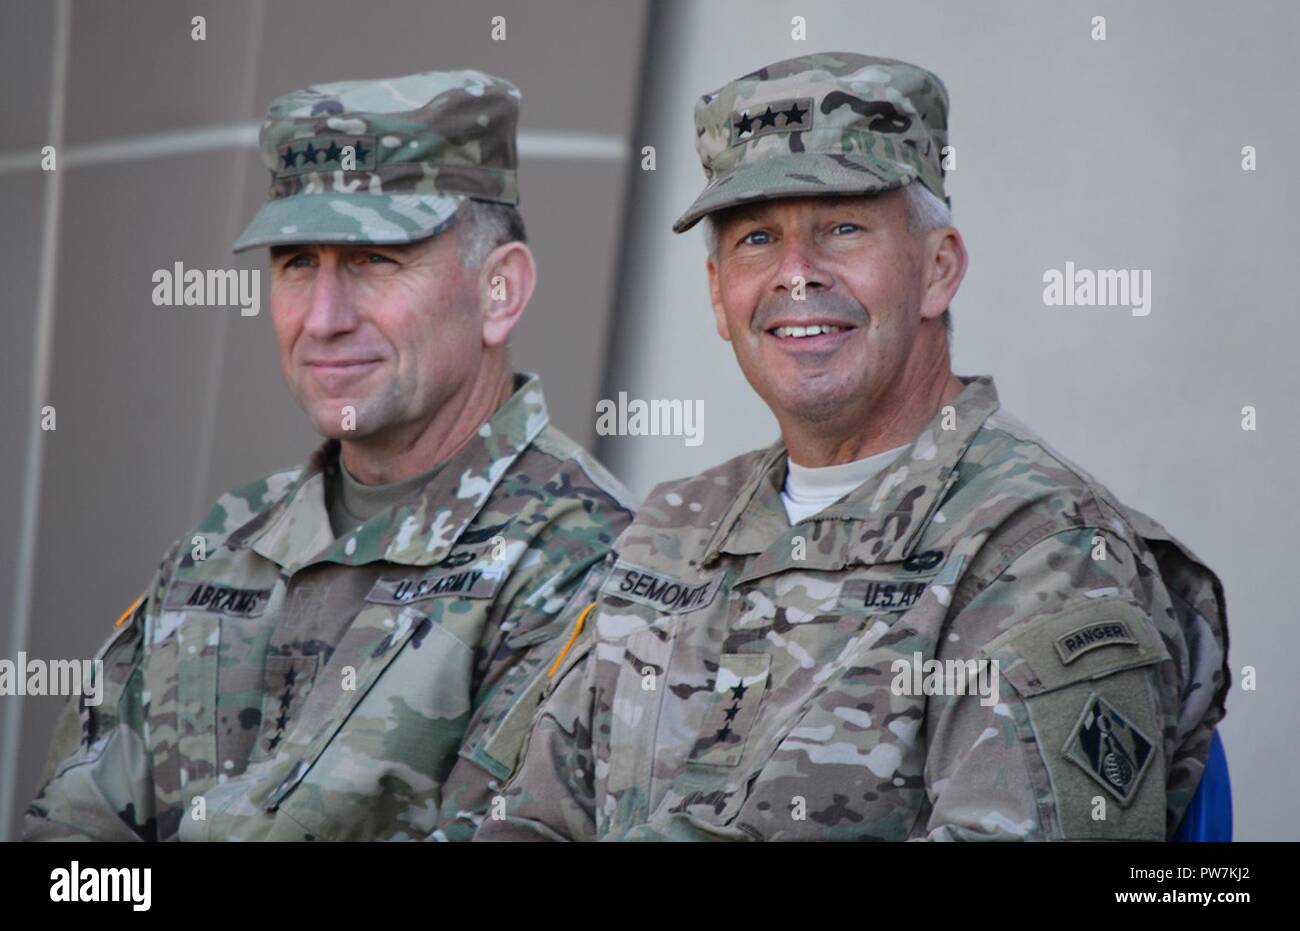 Gen. Robert Abrams, commanding general, U.S. Army Forces Command, left, and Lt. Gen. Todd Semonite, commanding general, U.S. Army Corps of Engineers, right, look out into the audience during a Sept. 21 ribbon-cutting ceremony for the new Weed Army Community Hospital at Fort Irwin, California. Stock Photo